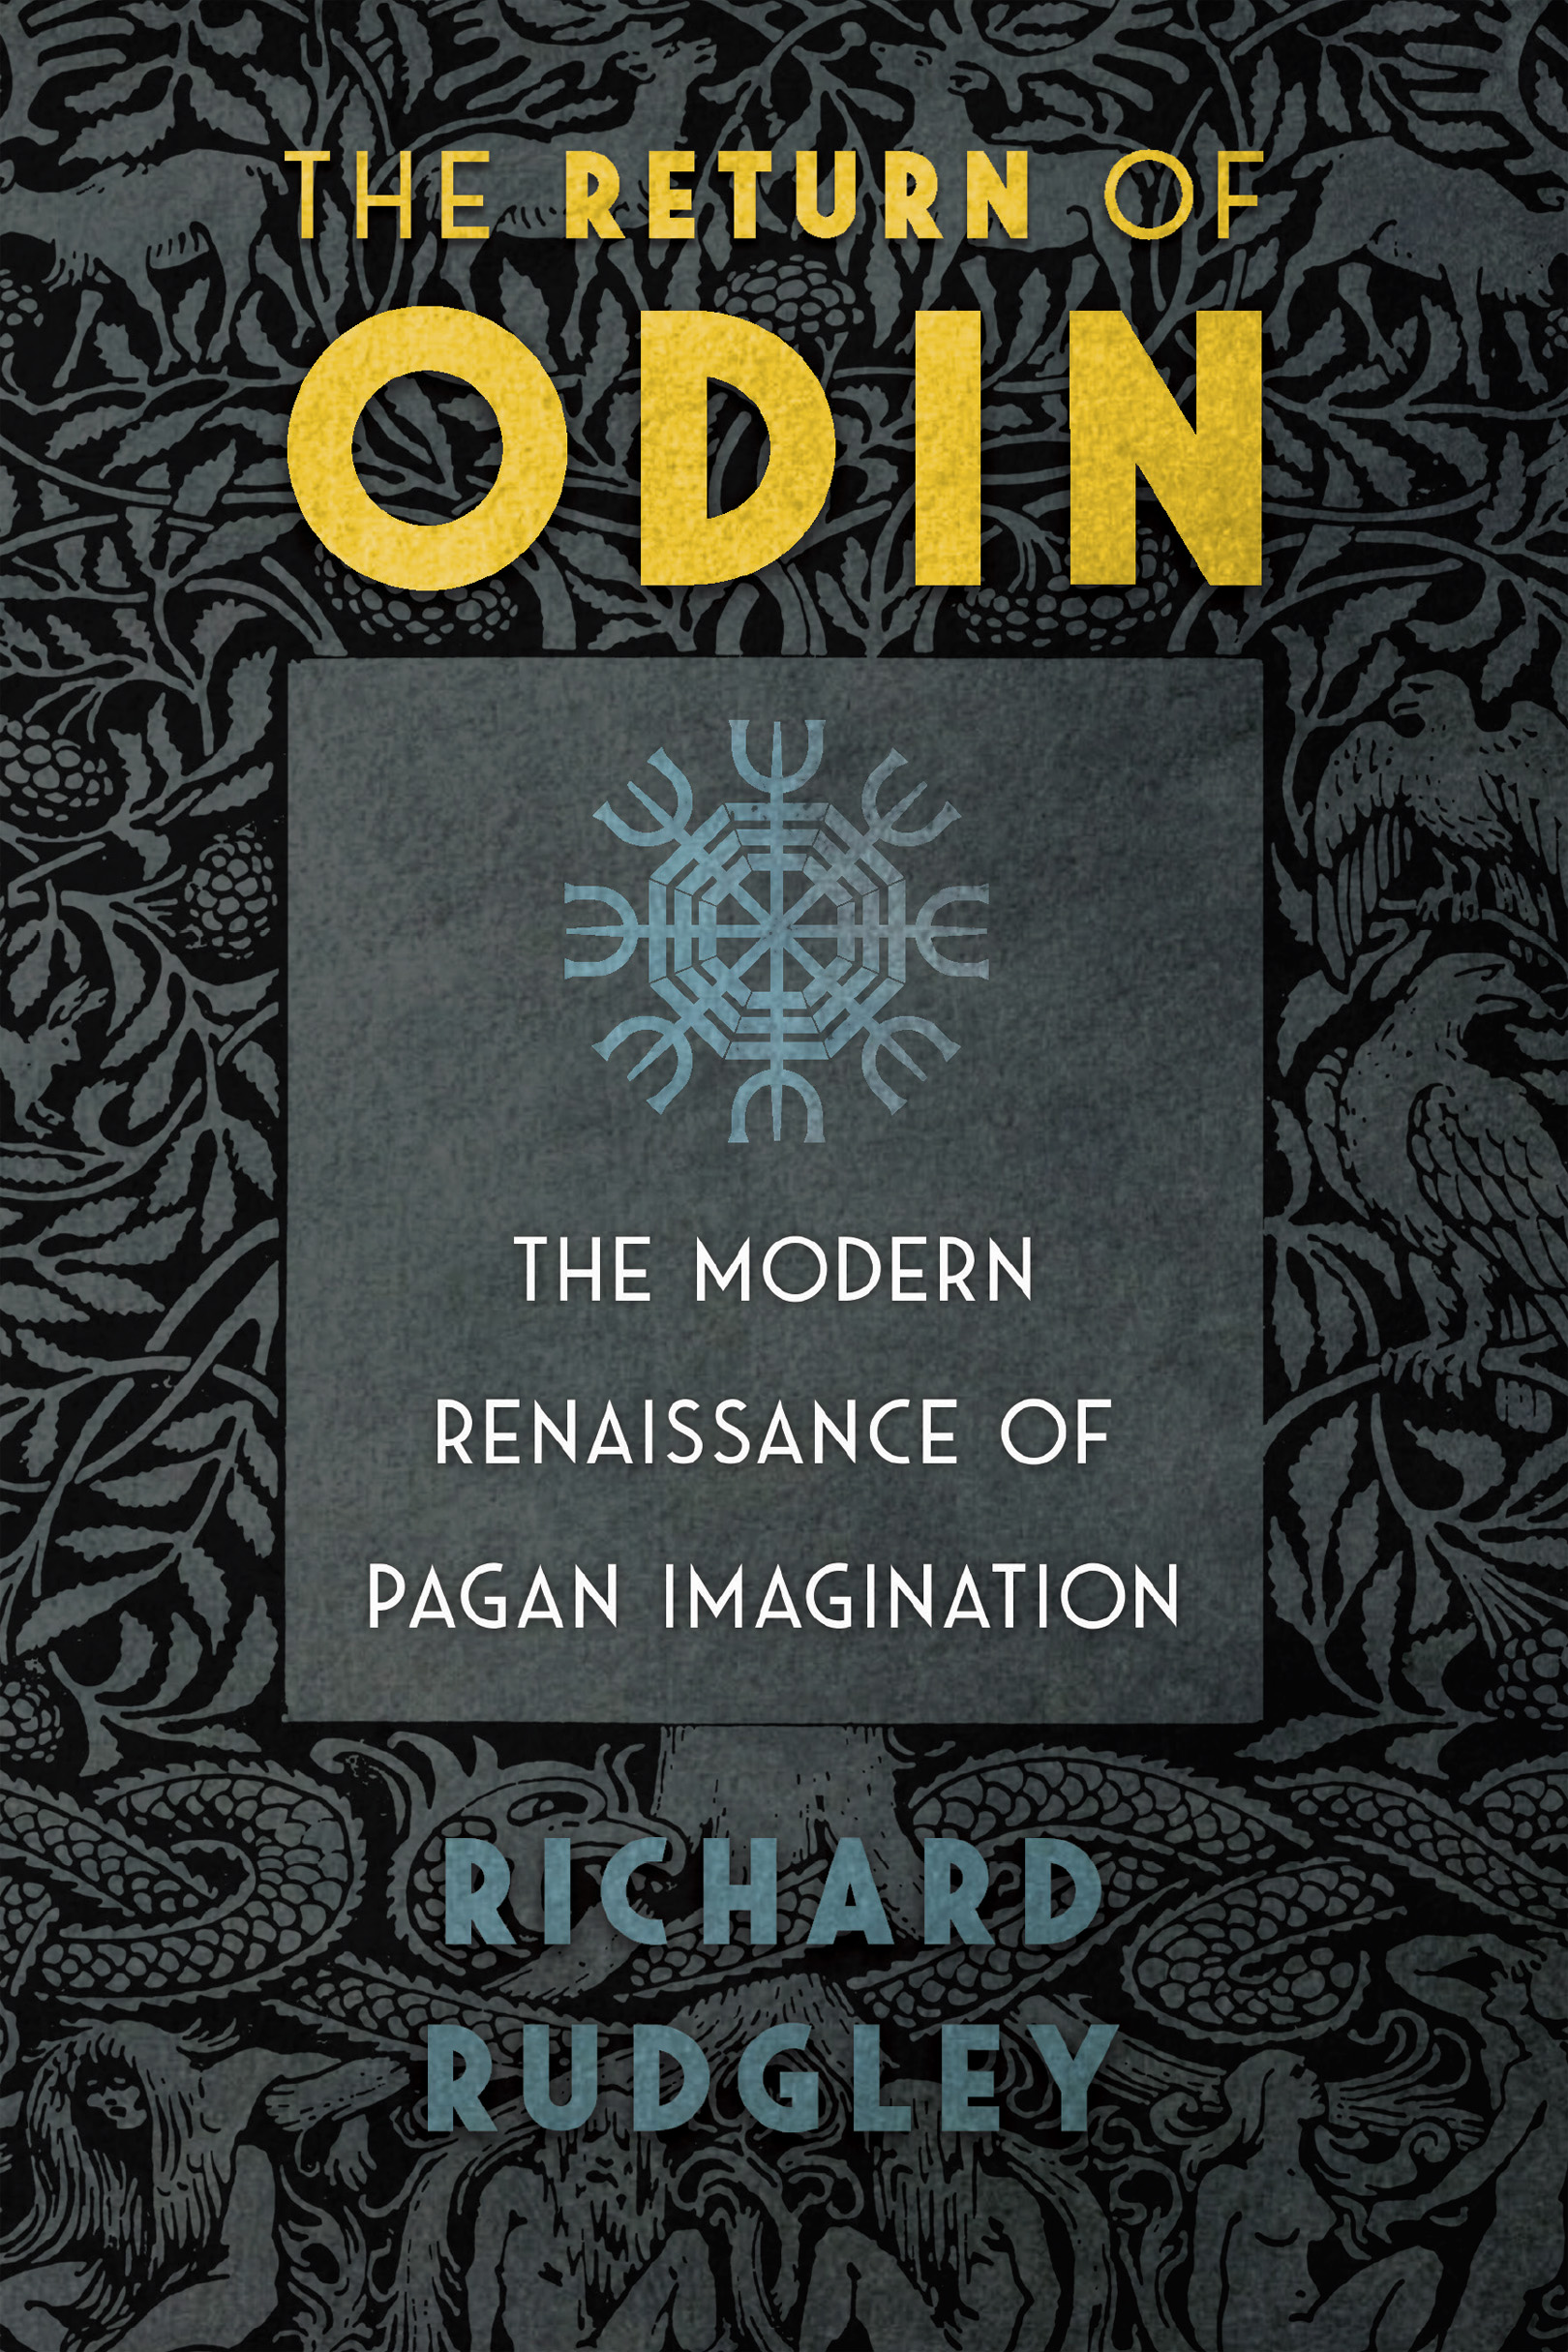 To the followers of Odin Past Present and Future THE RETURN OF ODIN - photo 1